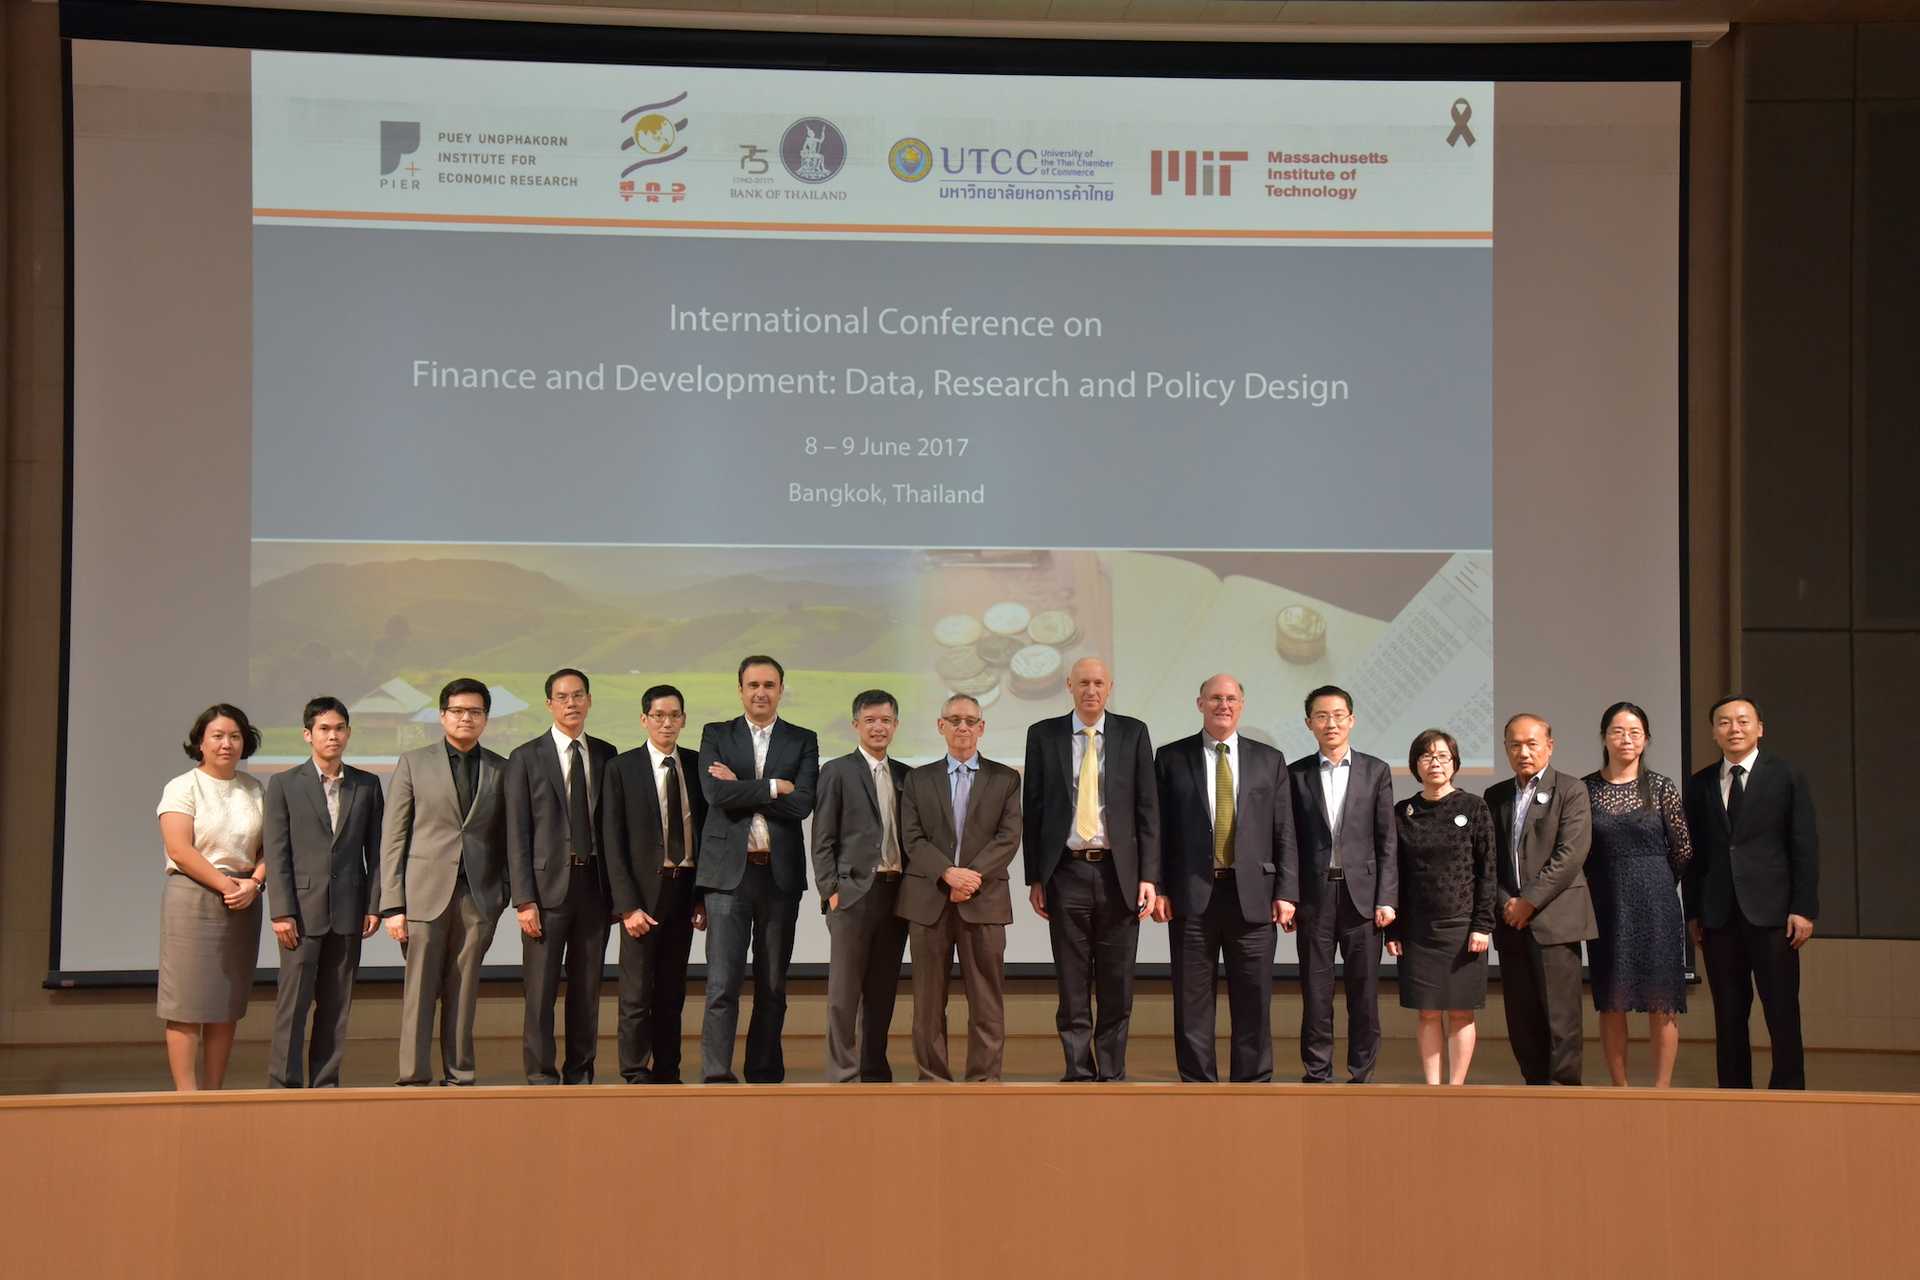 International Conference on Finance and Development: Data, Research, and Policy Design